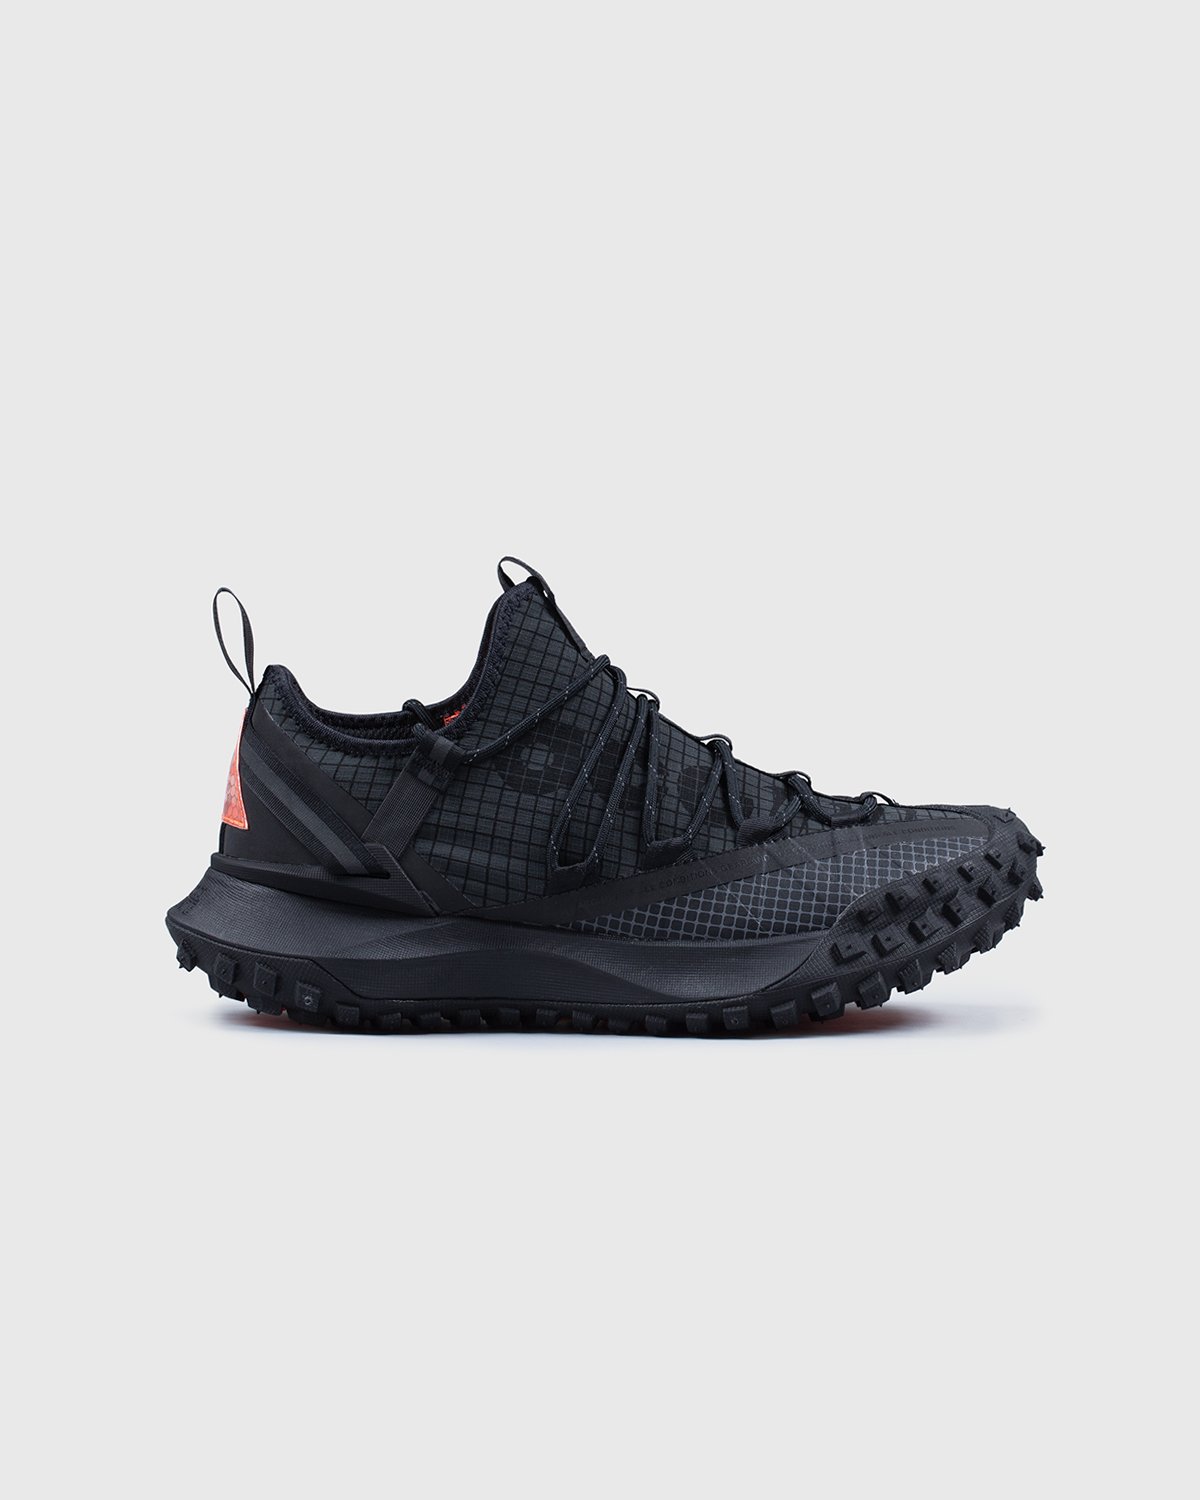 Nike ACG - Mountain Fly Low Anthracite - Footwear - Black - Image 1